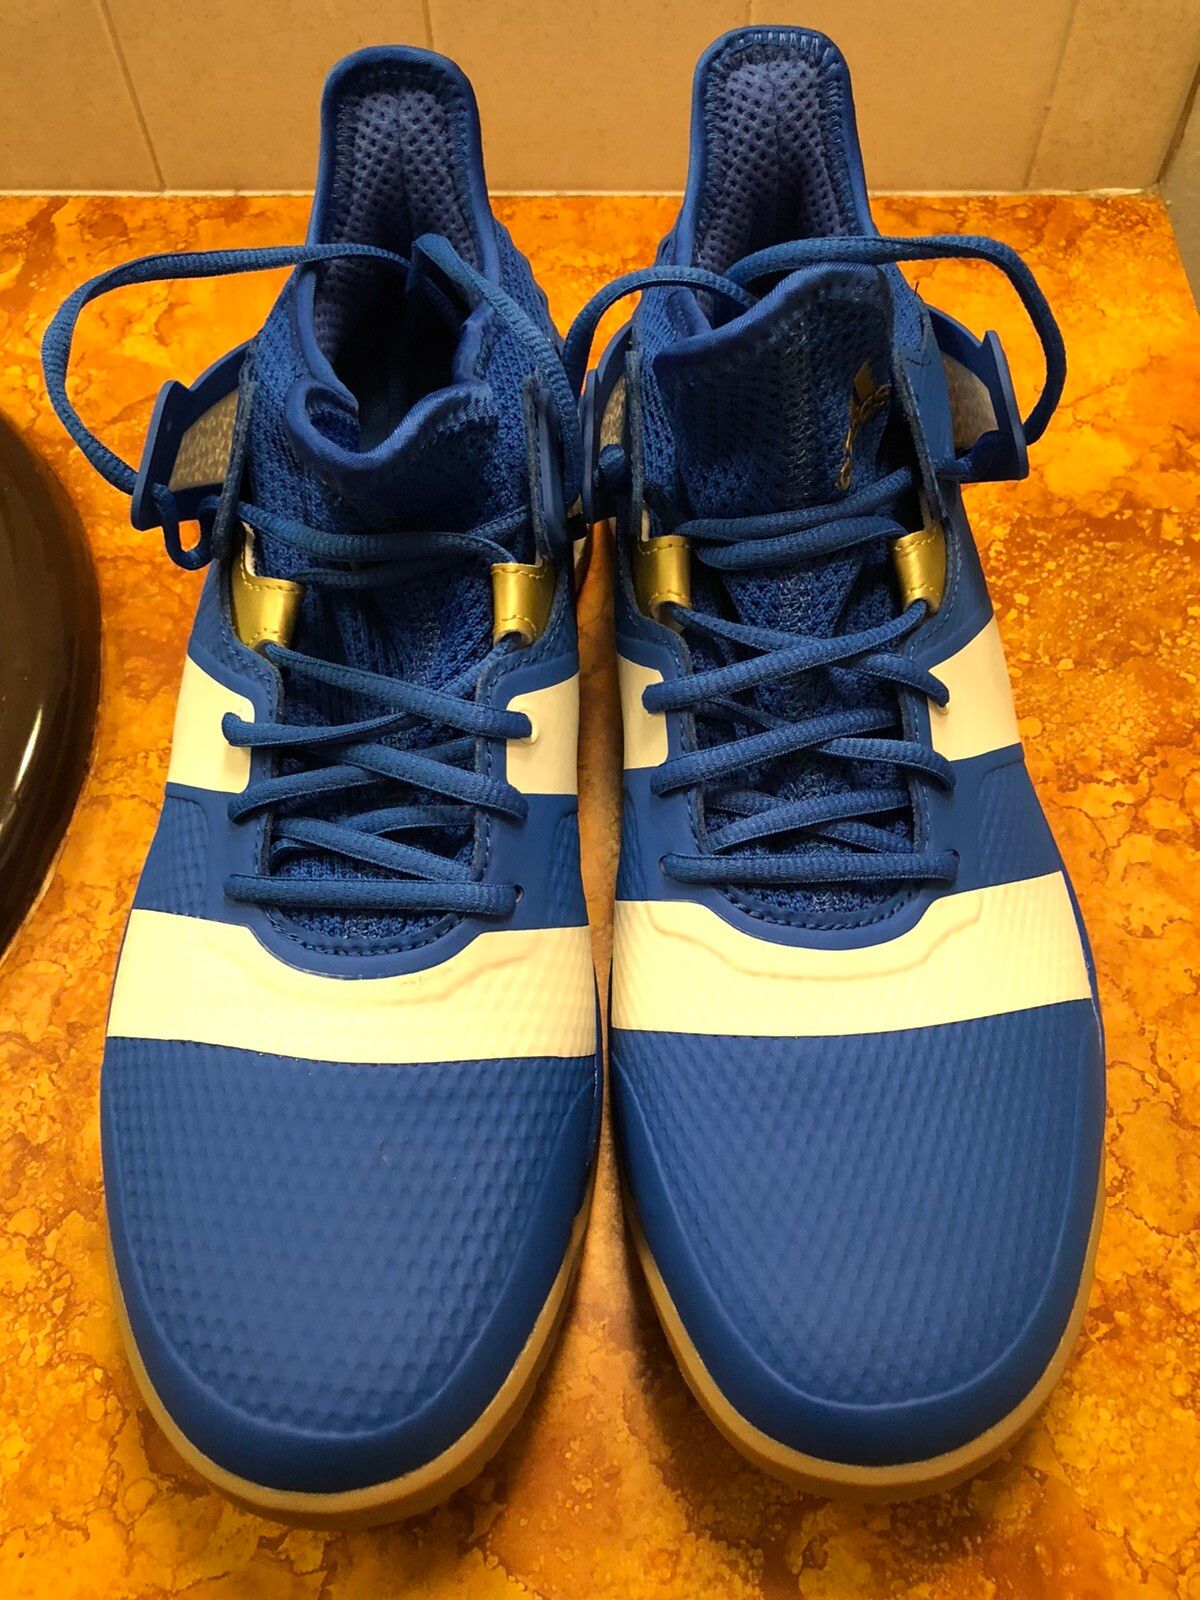 Adidas adidas Stabil X Men's Volleyball Shoes Blue/Gold Size US 12.5 / EU 45-46 - 2 Preview